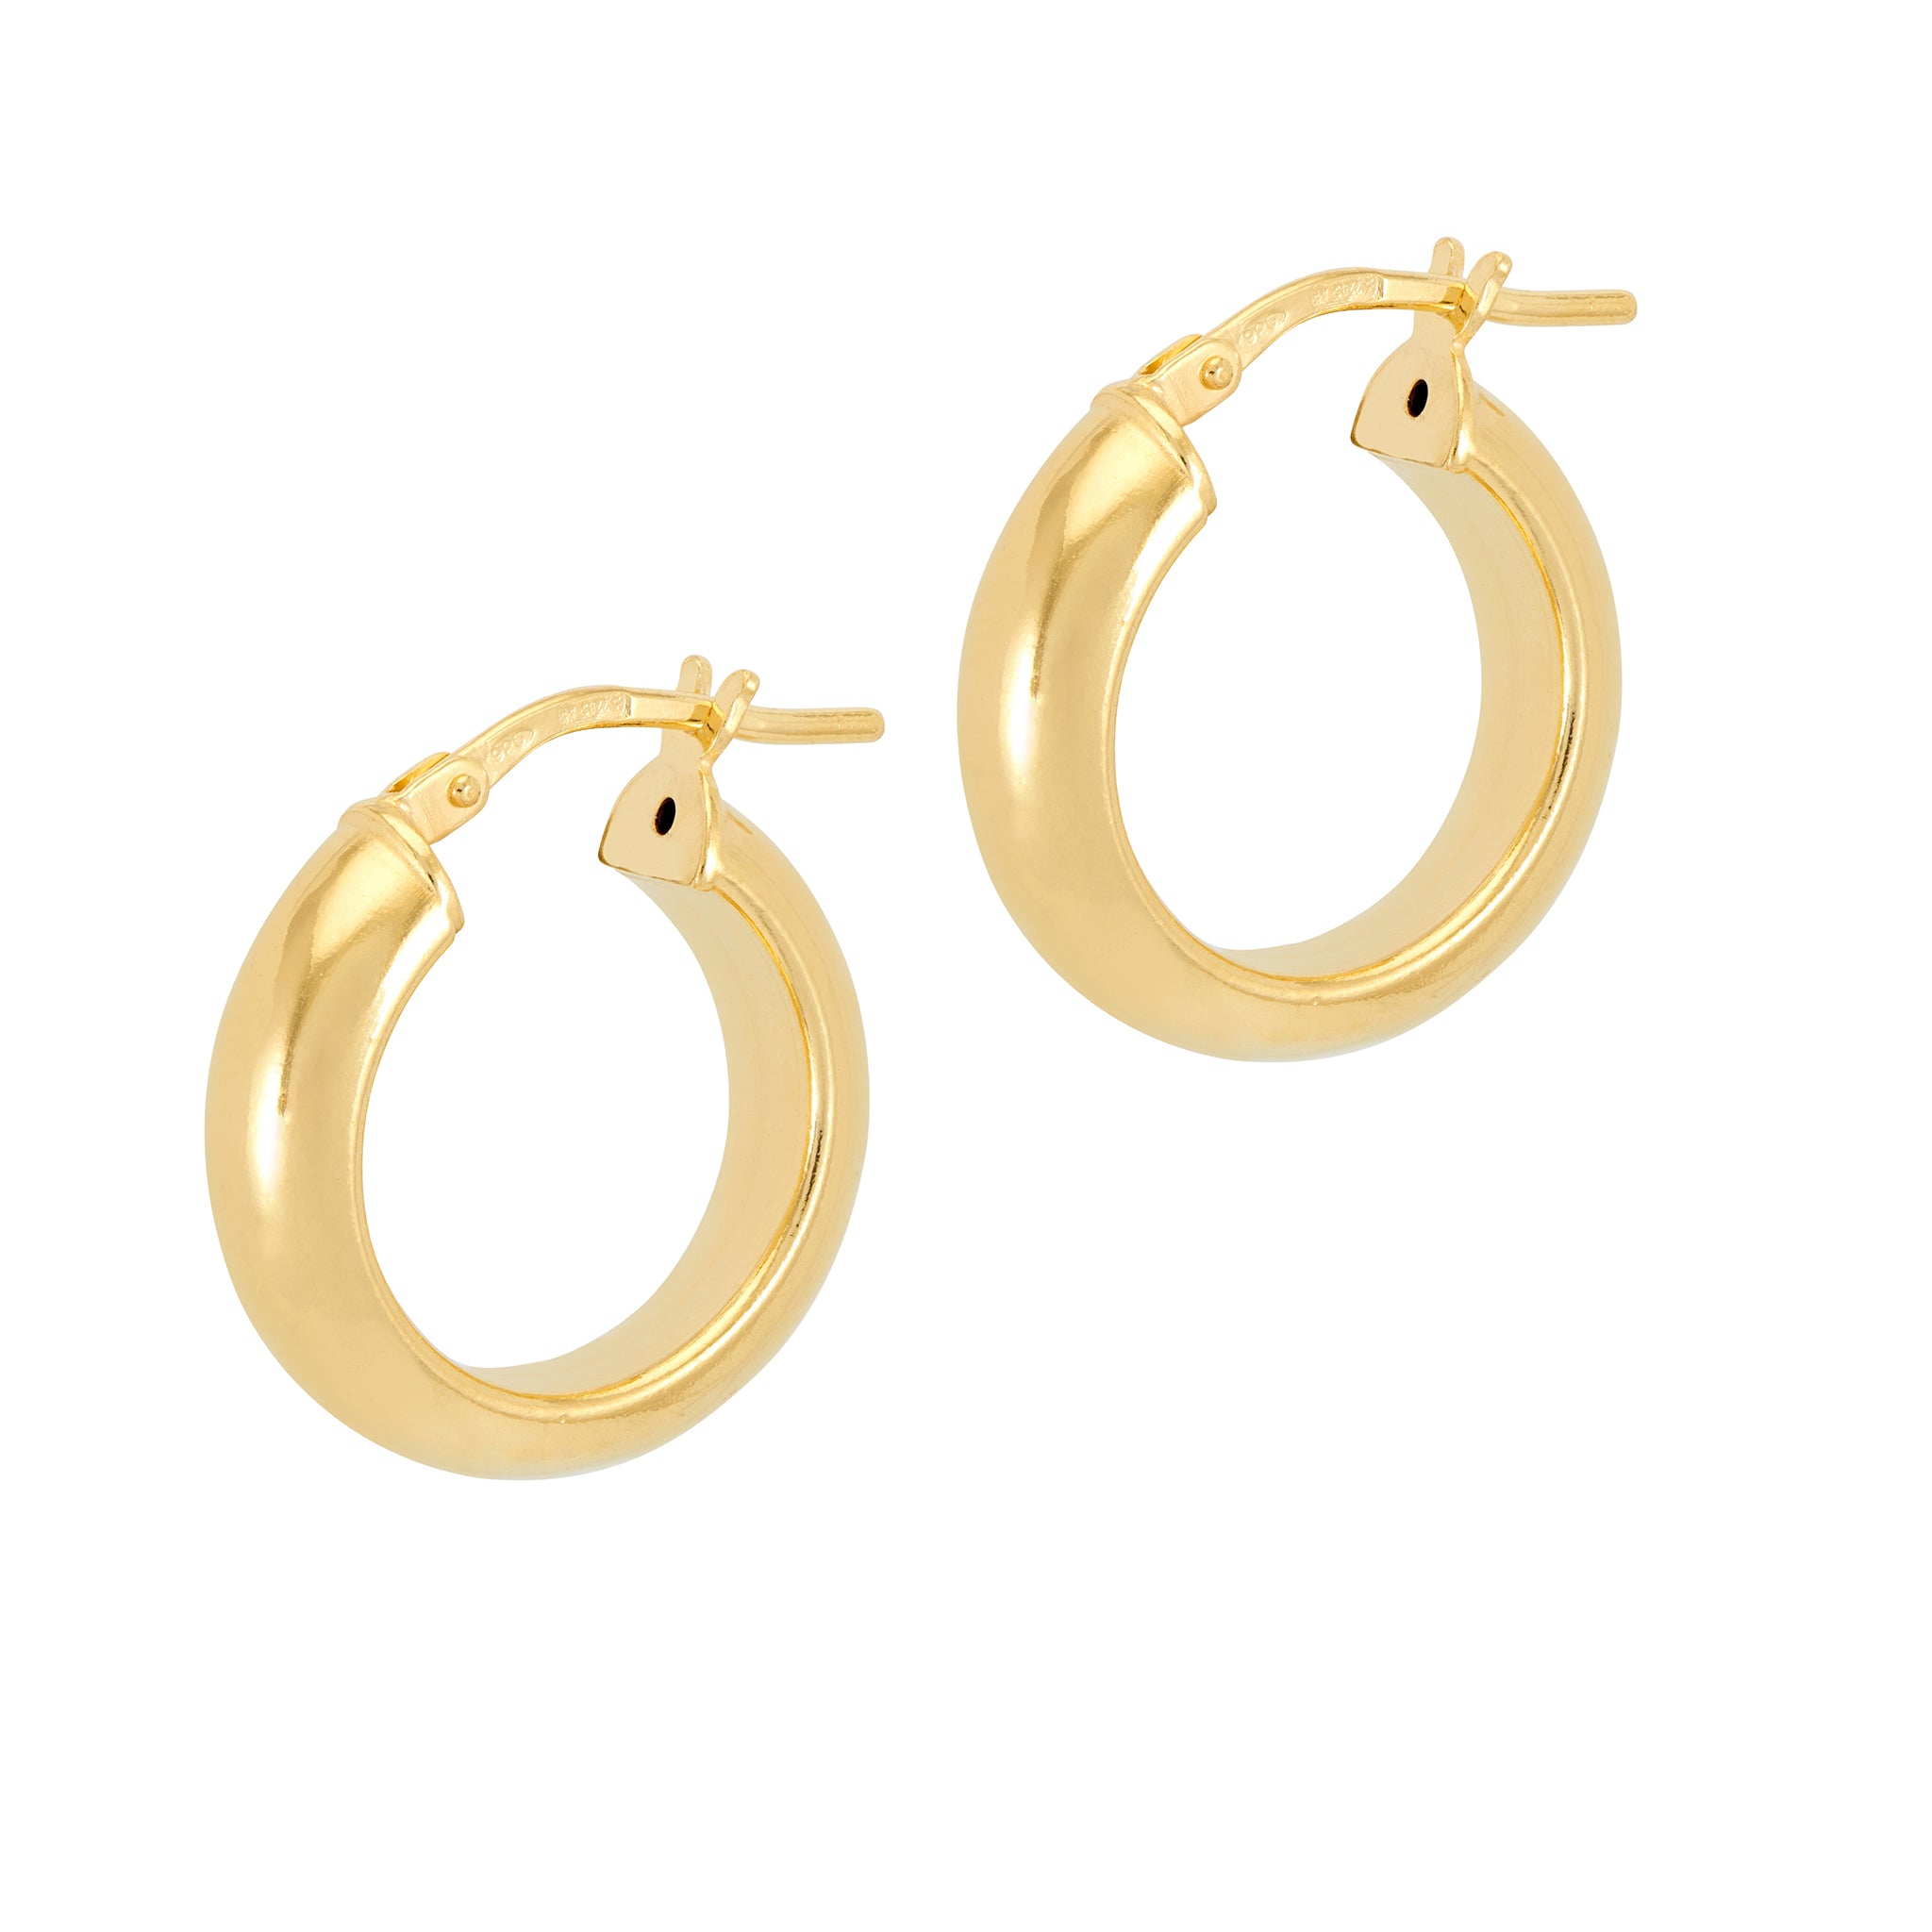 Small Shiny CUrved Gold hoop earrings